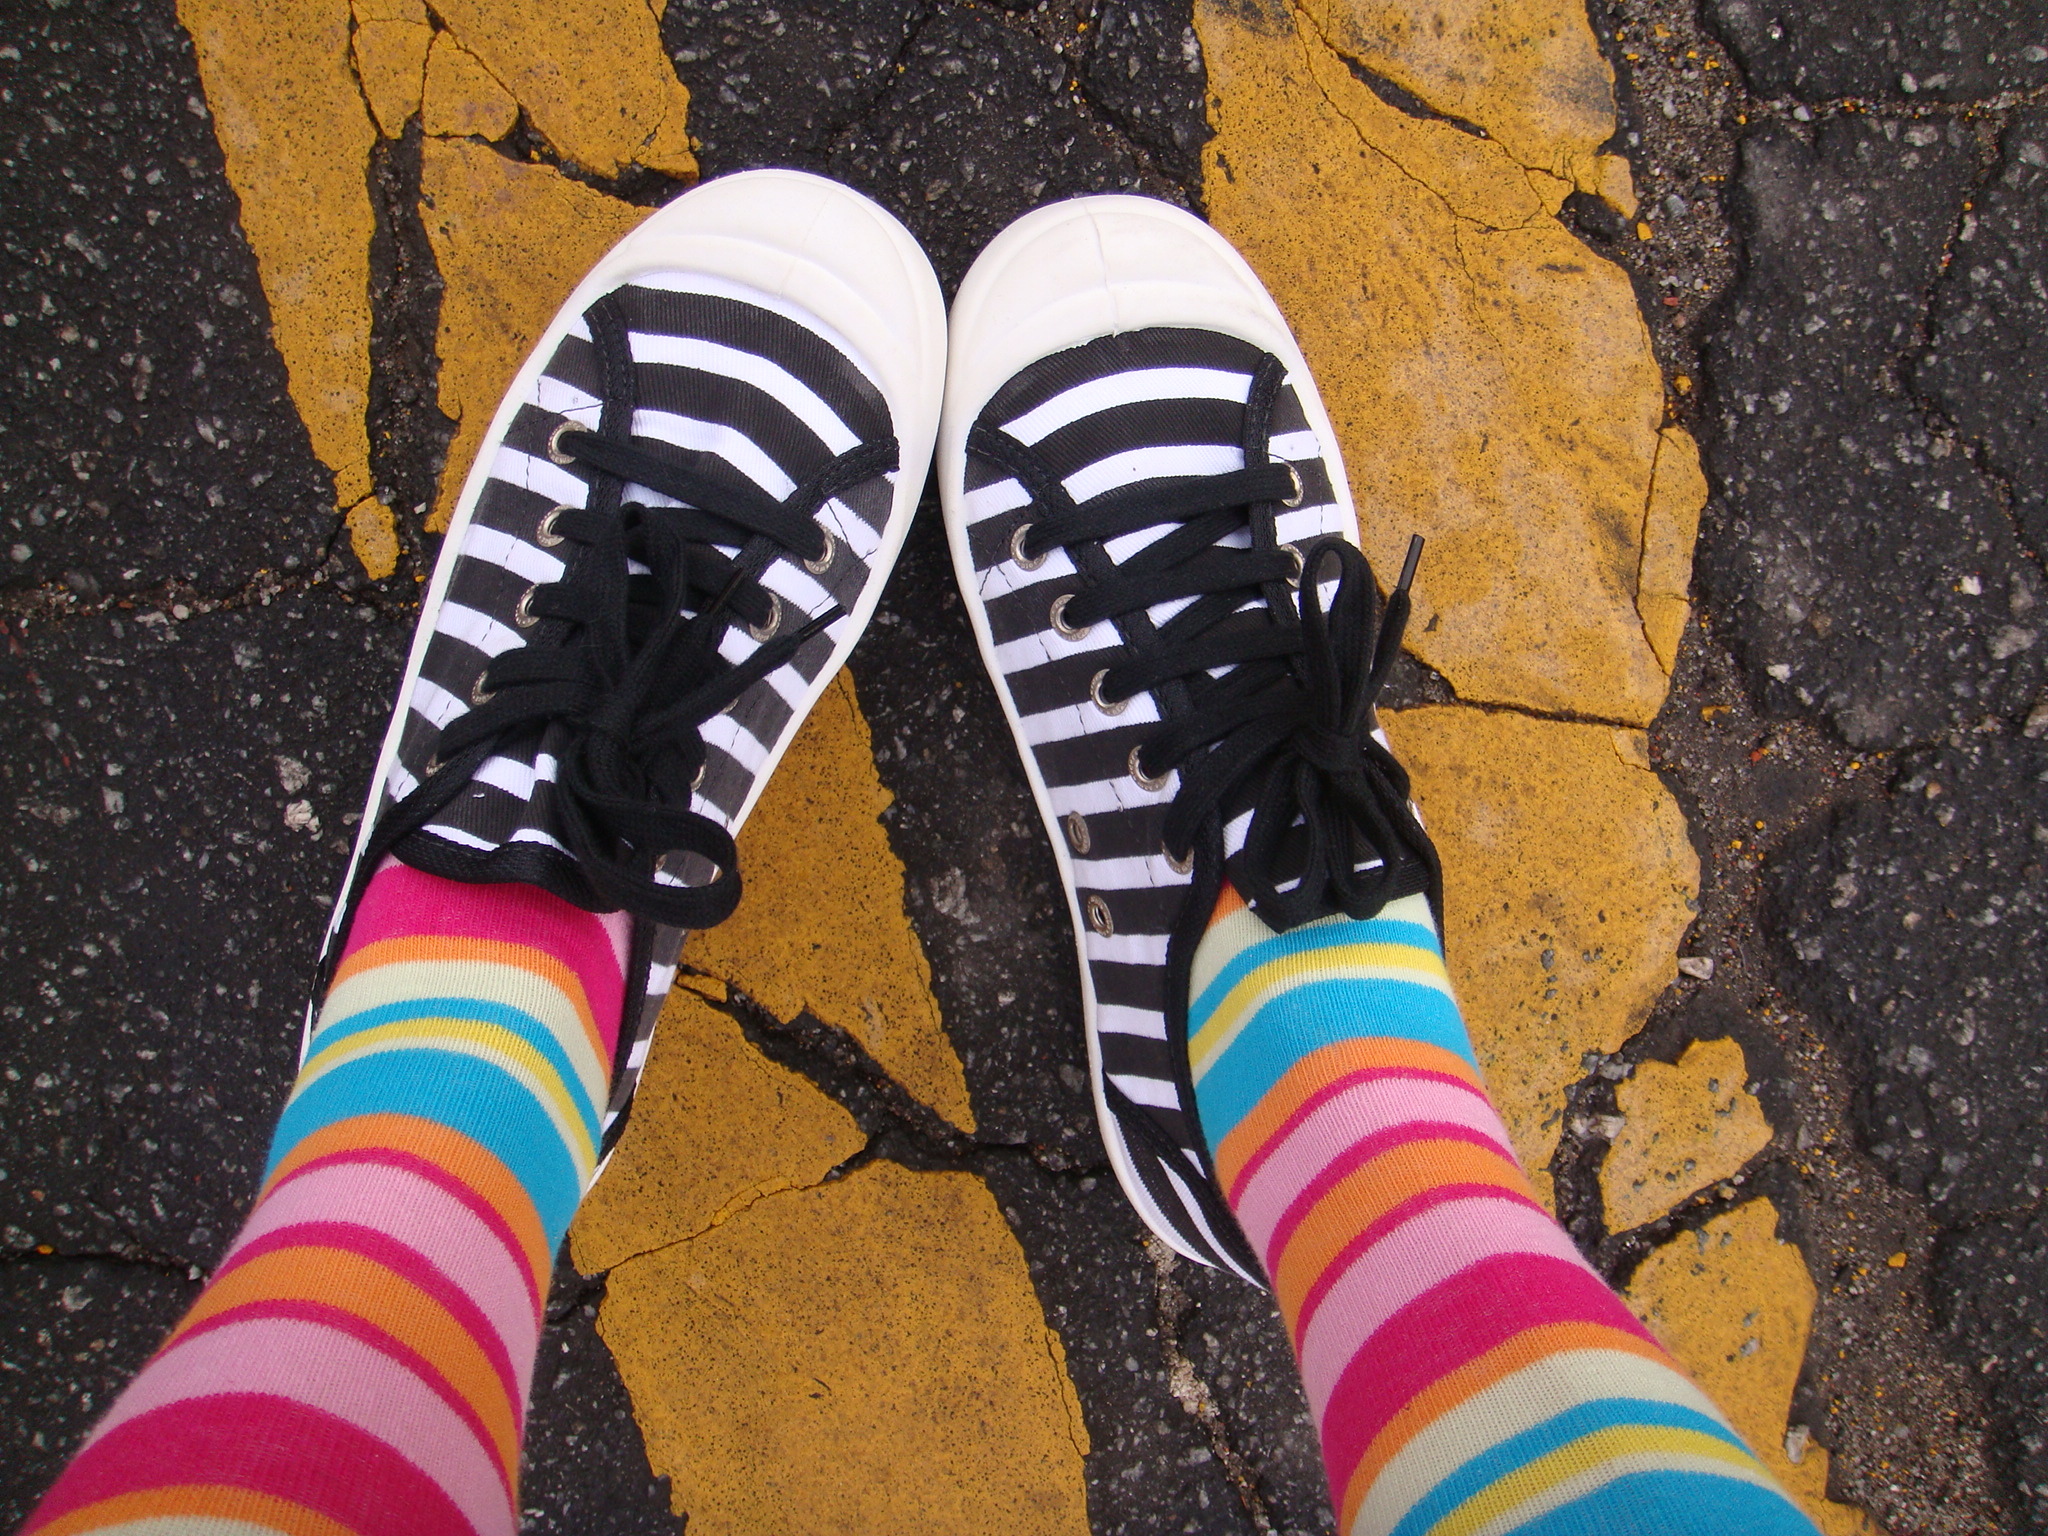 two legs in colorful socks standing on yellow striped sidewalk